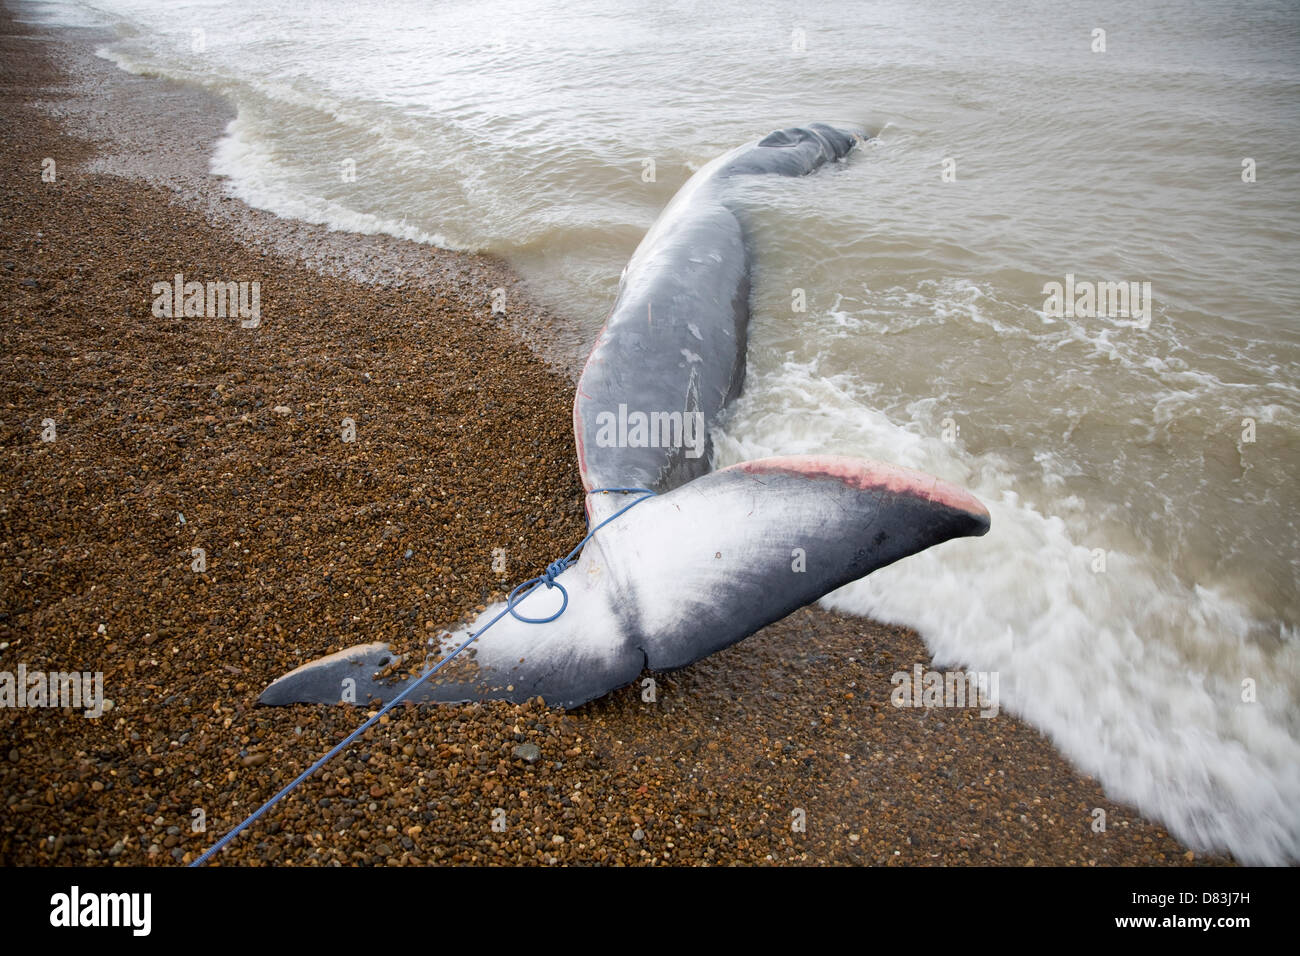 Balaenoptera High Resolution Stock Photography and Images - Alamy
